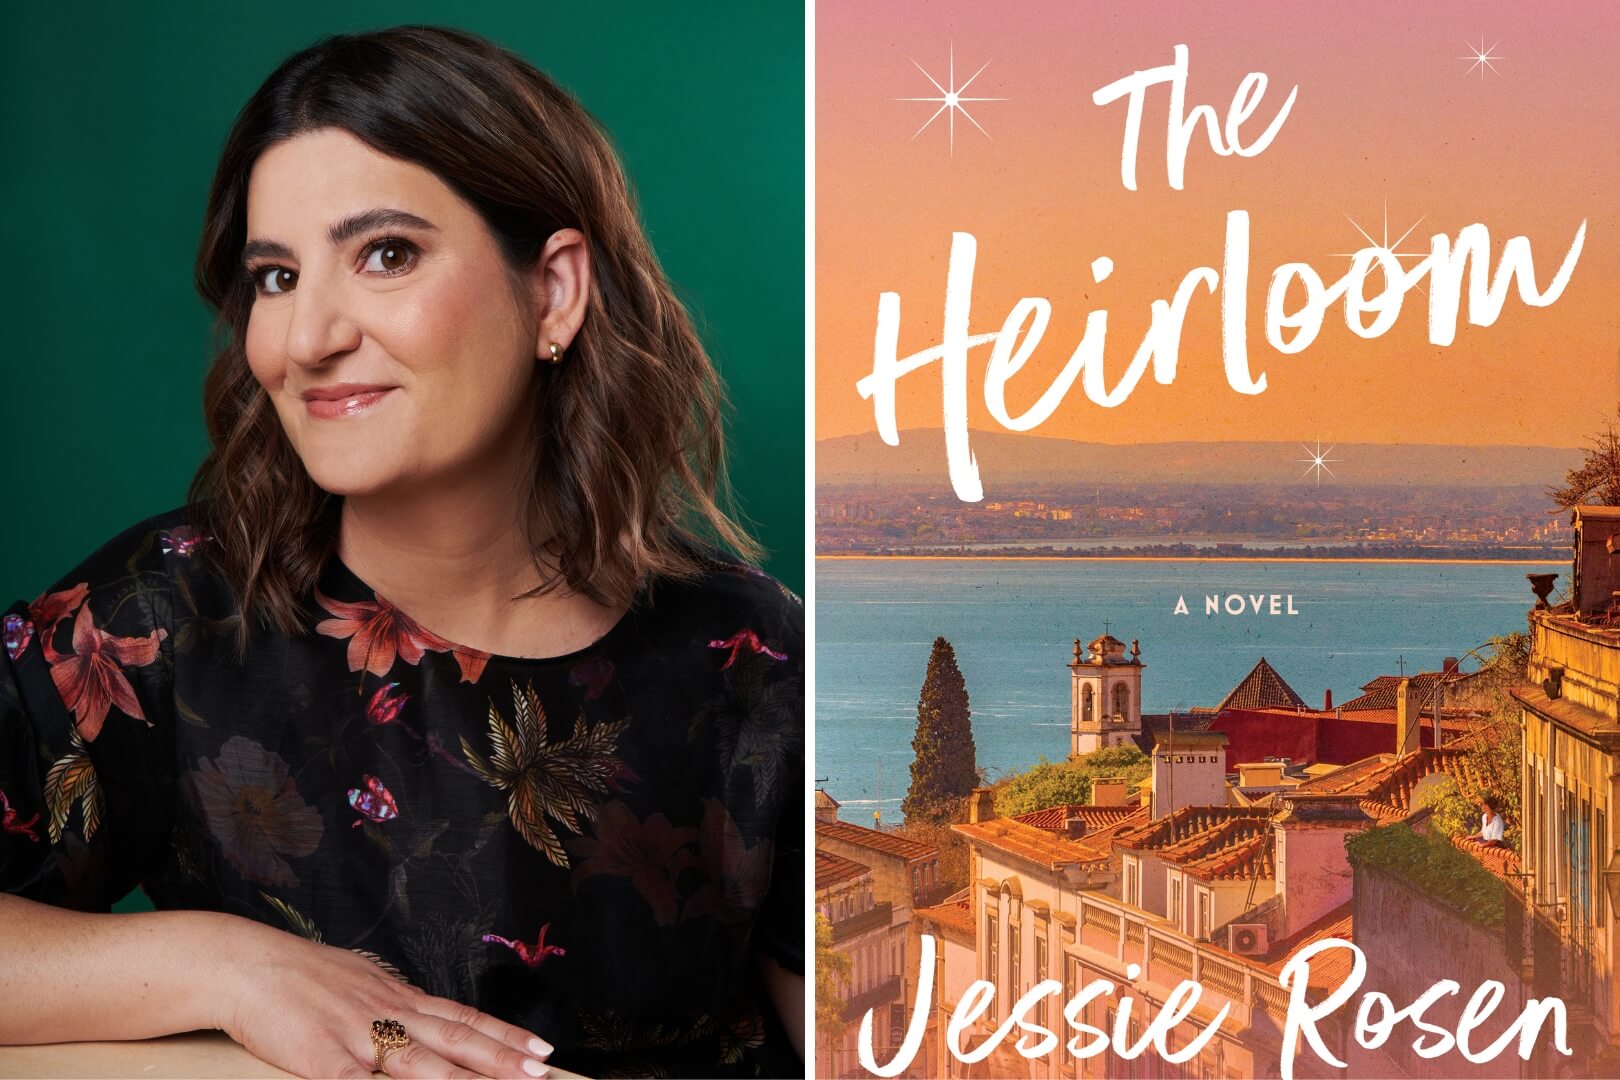 Q&A with Jessie Rosen, Author of The Heirloom